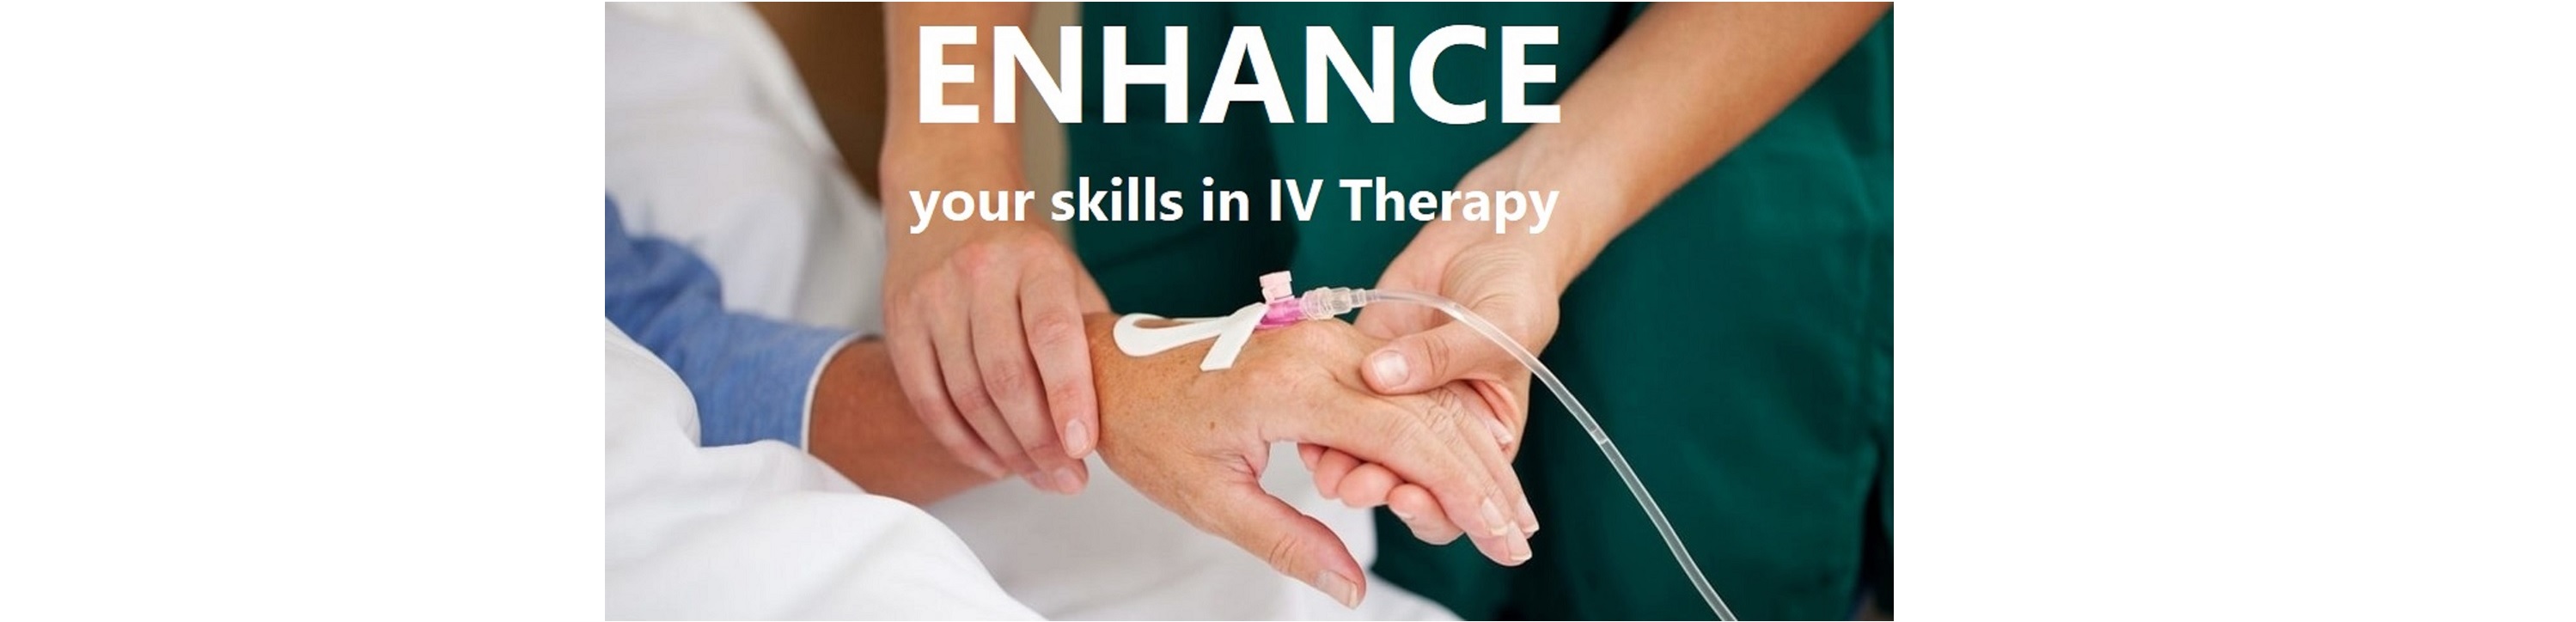 IV Therapy Training Course - July 2022 Banner